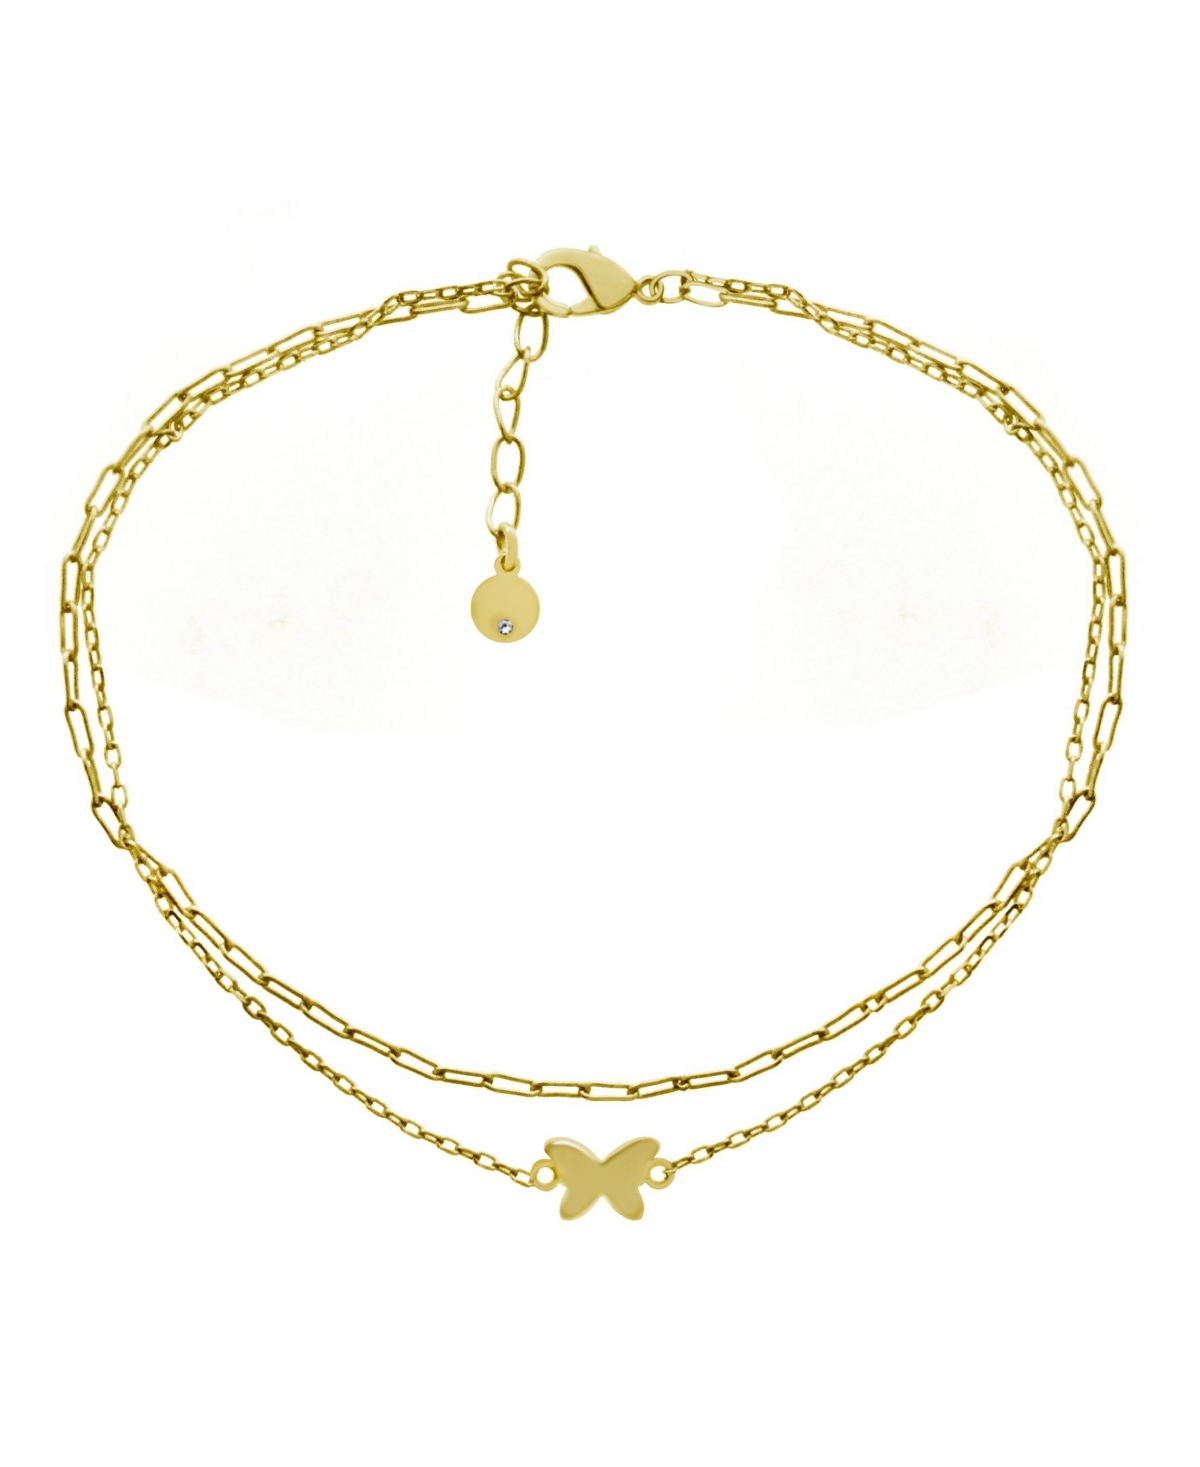 Butterfly Double Chain Anklet in Gold Plate - Gold